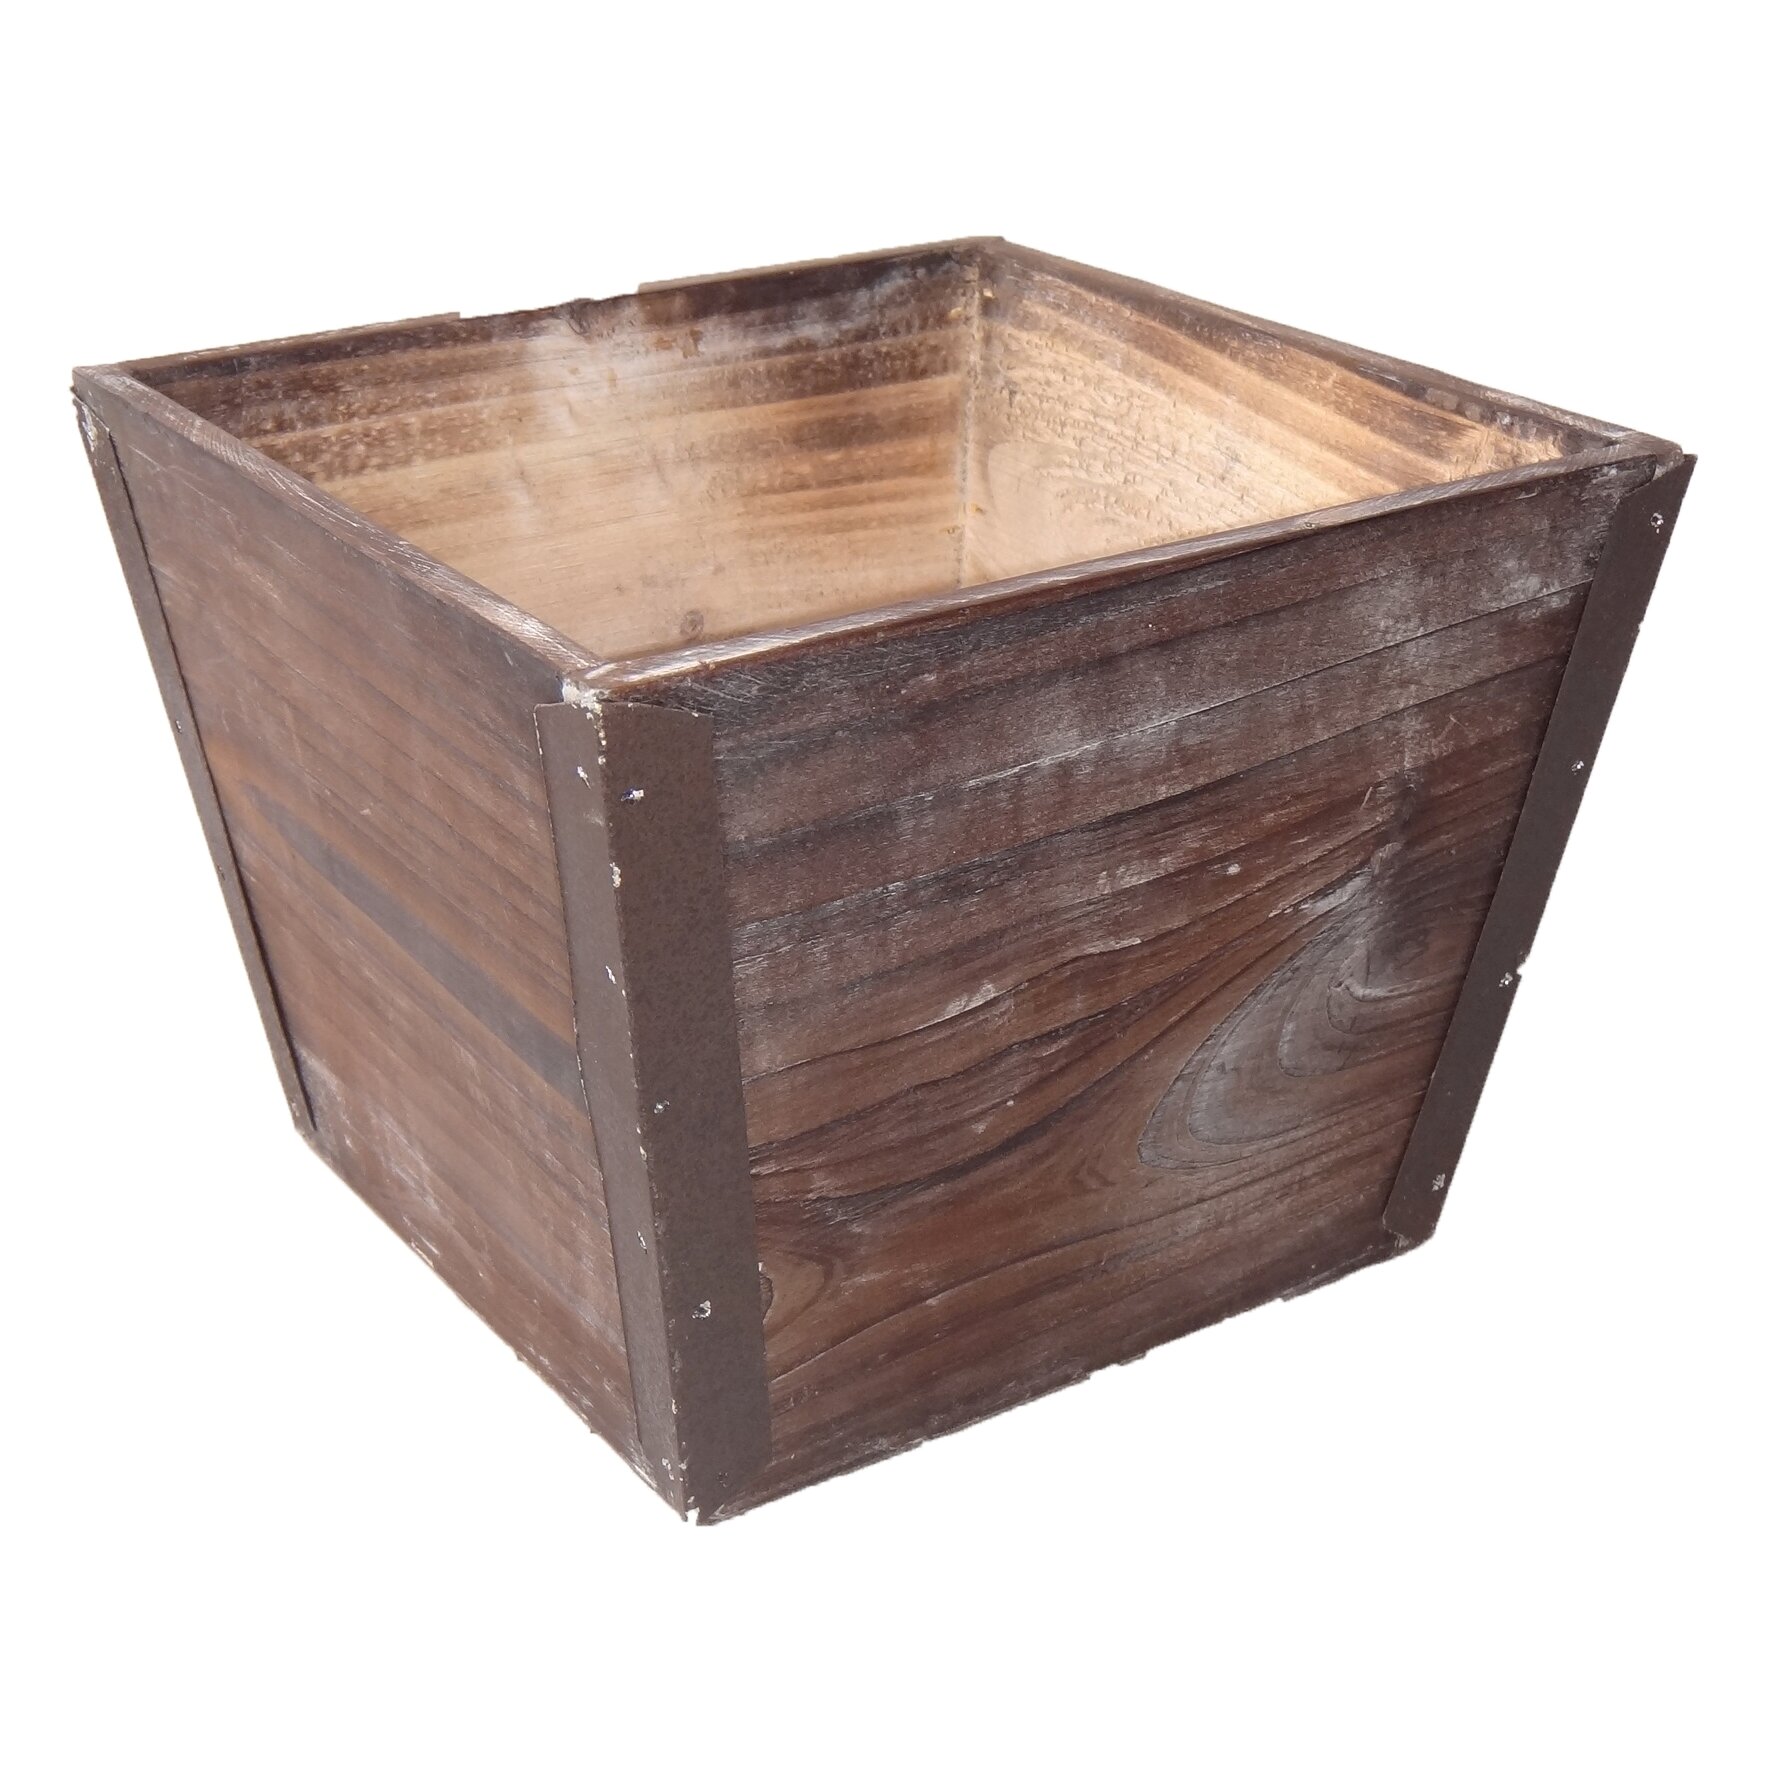 Cheungs Wooden Square Planter Box &amp; Reviews Wayfair